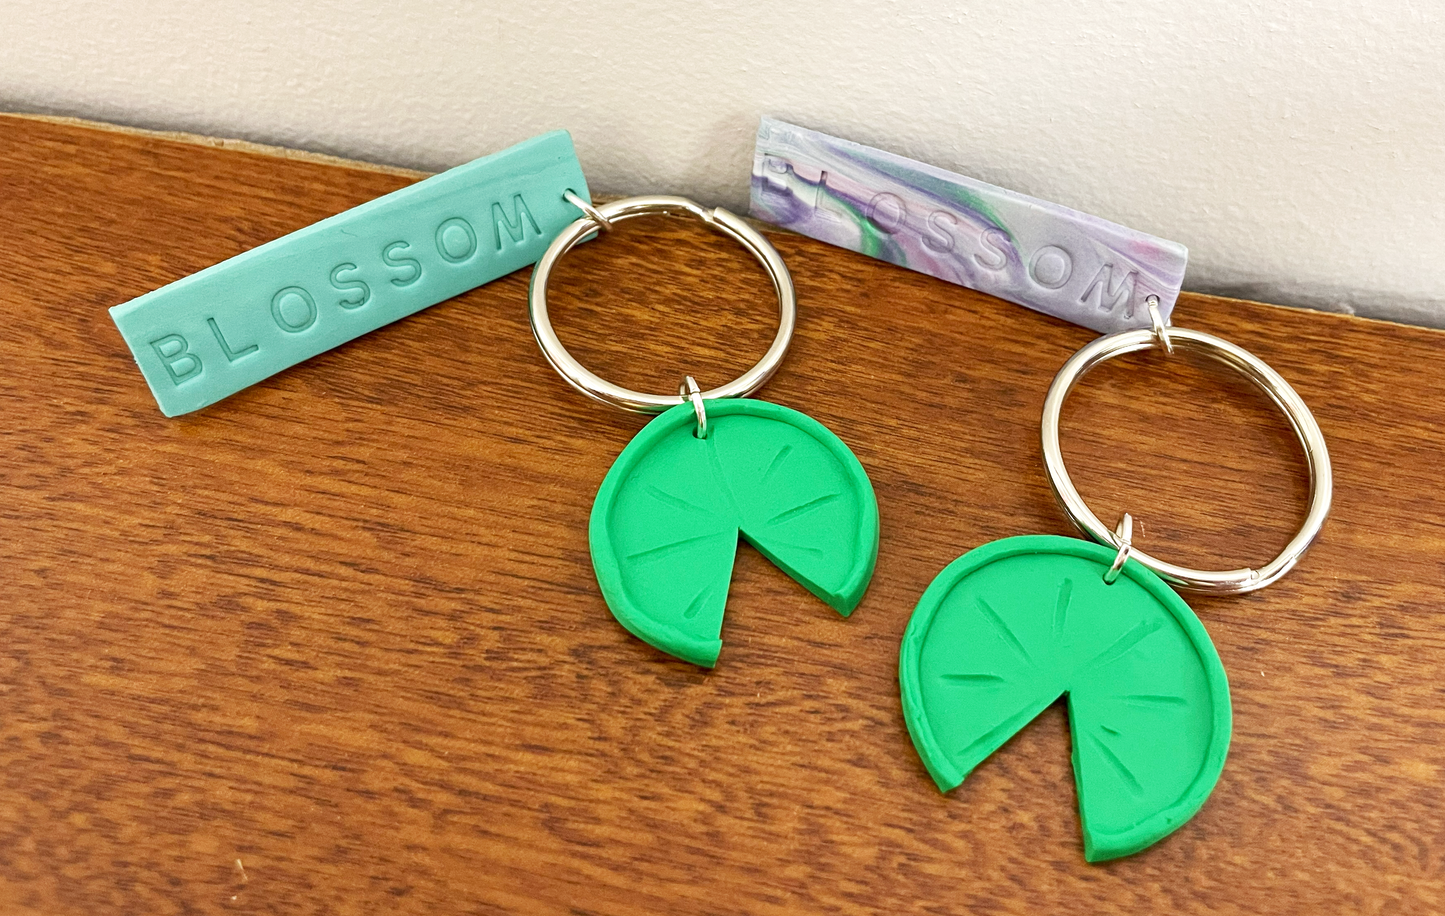 Keychains - "Blossom" and Lily Pad